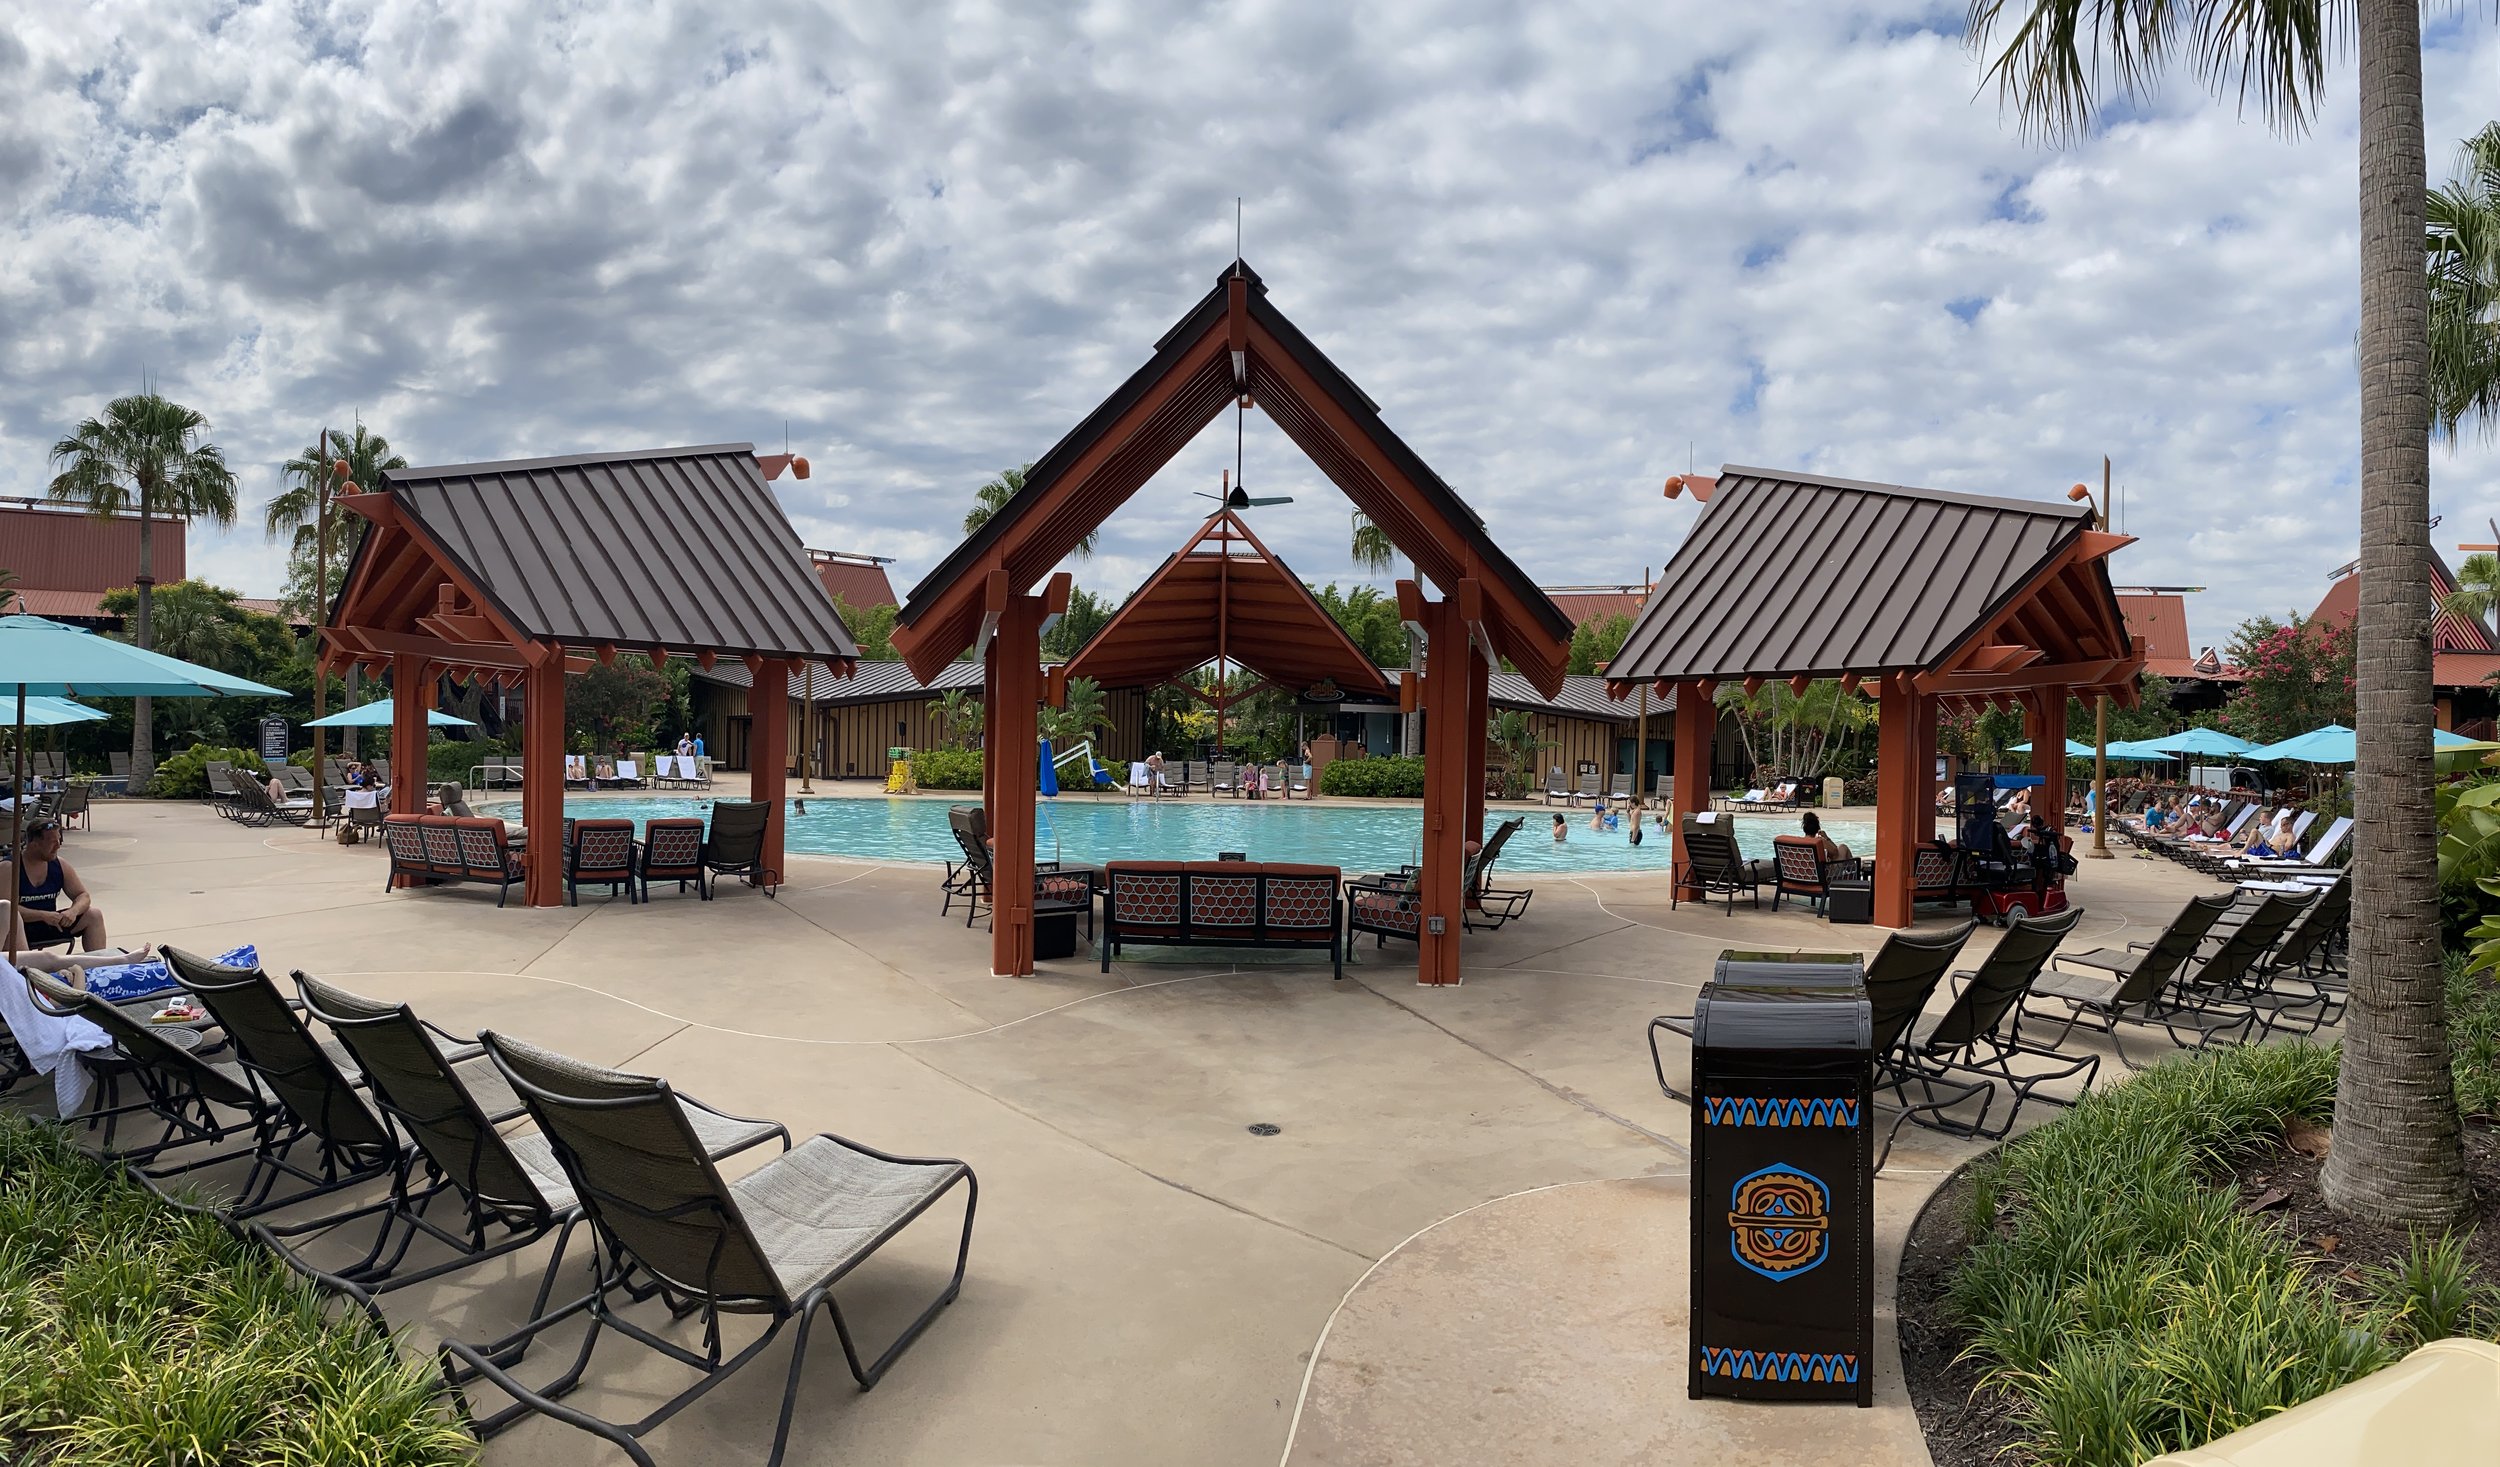  The Oasis pool, also known as the “quiet pool” has cabana rentals, poolside bar service, and plenty of lounge chairs.  